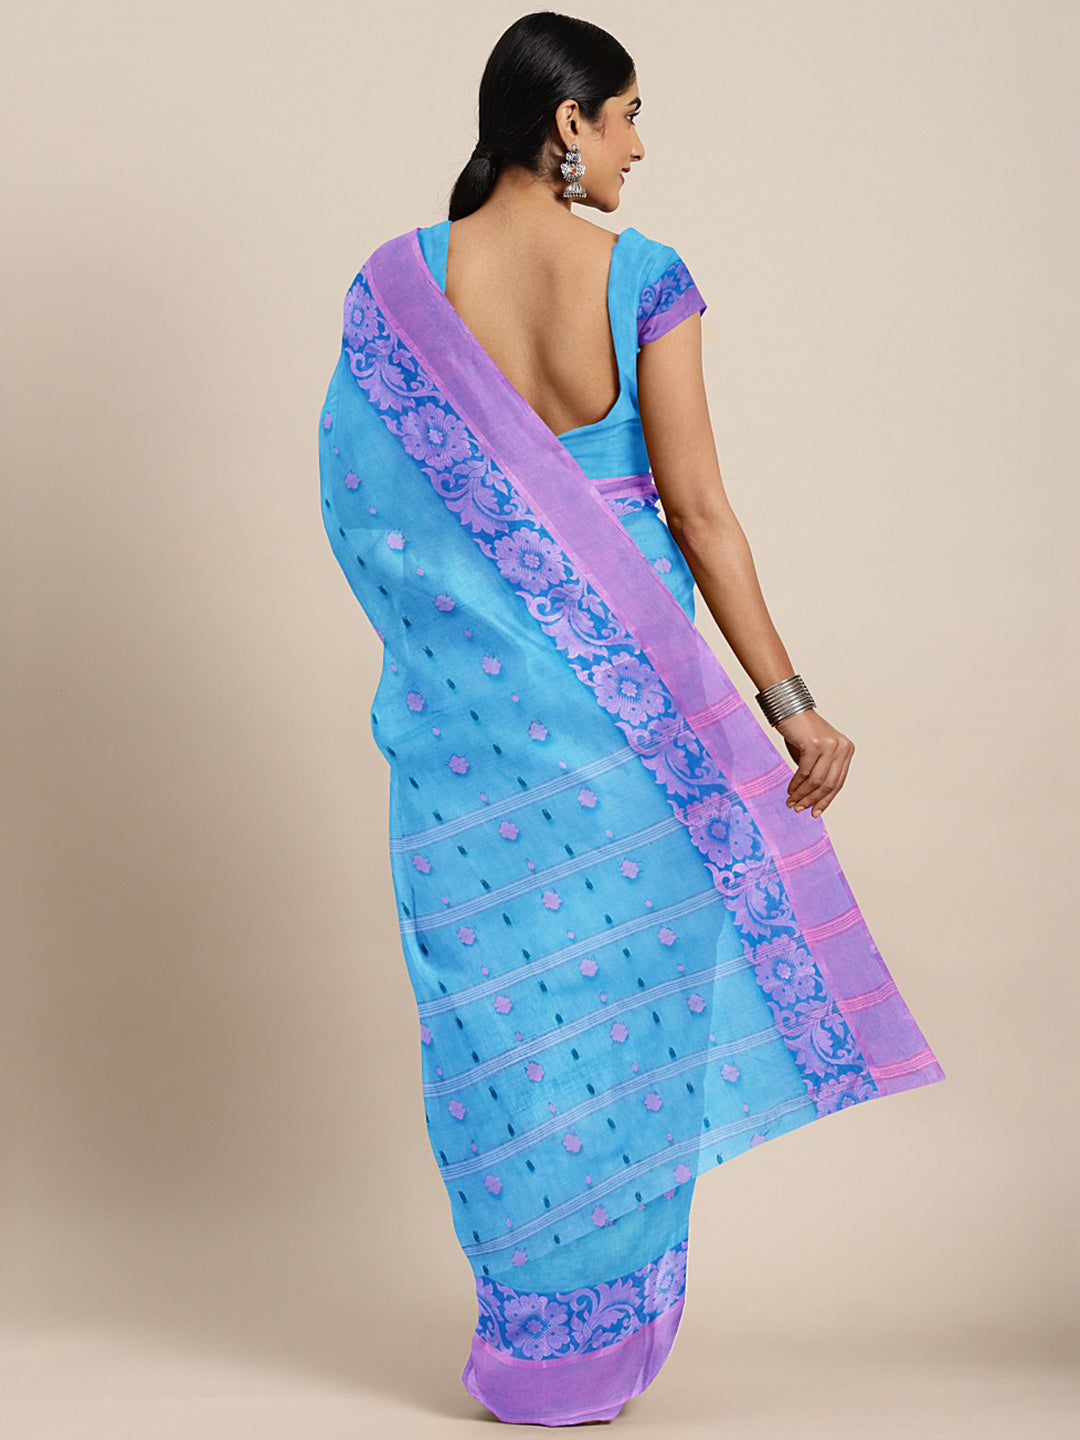 Blue Tant Woven Design Saree Without Blouse Piece DUTASA017 DUTASA017-Saree-Kalakari India-DUTASA017-Geographical Indication, Hand Crafted, Heritage Prints, Natural Dyes, Sarees, Silk Cotton, Sustainable Fabrics, Taant, Tant, West Bengal, Woven-[Linen,Ethnic,wear,Fashionista,Handloom,Handicraft,Indigo,blockprint,block,print,Cotton,Chanderi,Blue, latest,classy,party,bollywood,trendy,summer,style,traditional,formal,elegant,unique,style,hand,block,print, dabu,booti,gift,present,glamorous,affordable